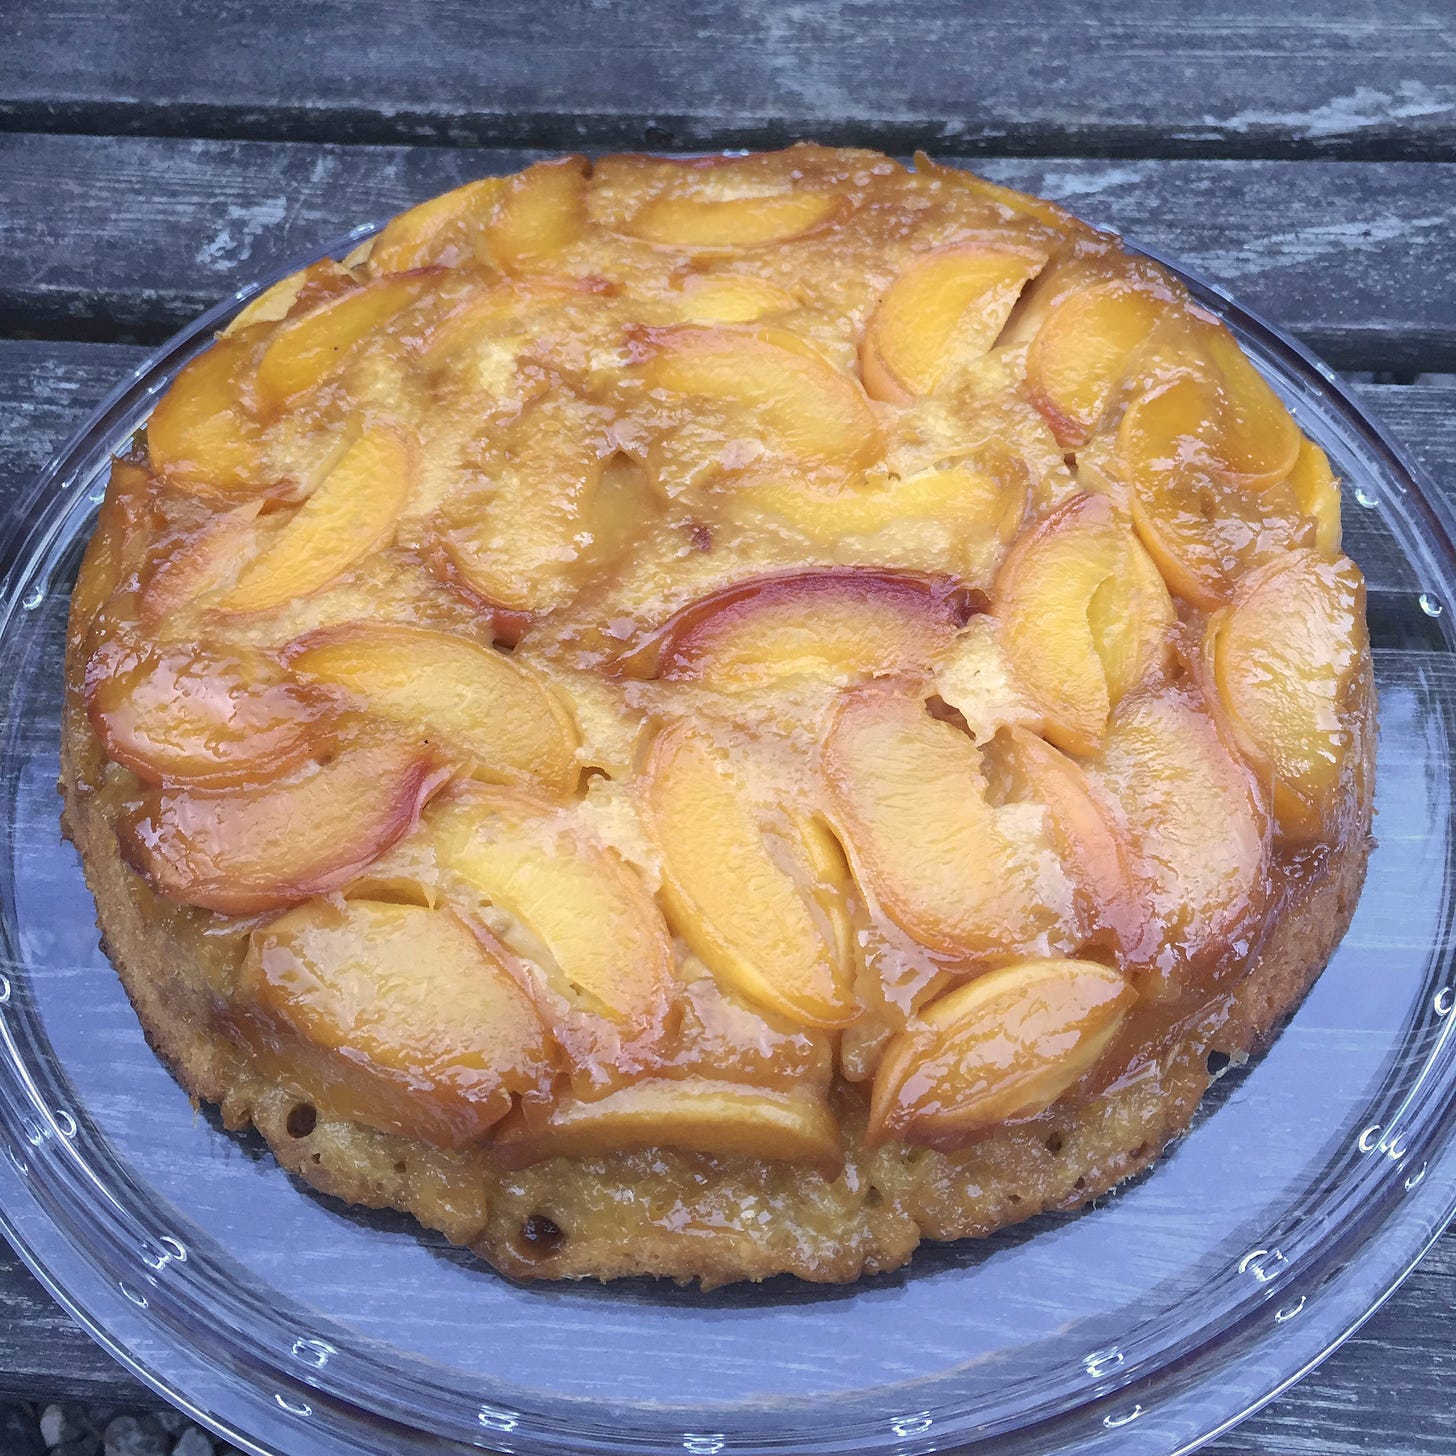 On a clear cake plate, an upside-down cake with yellow and reddish peach slices, caramelized at the edges.